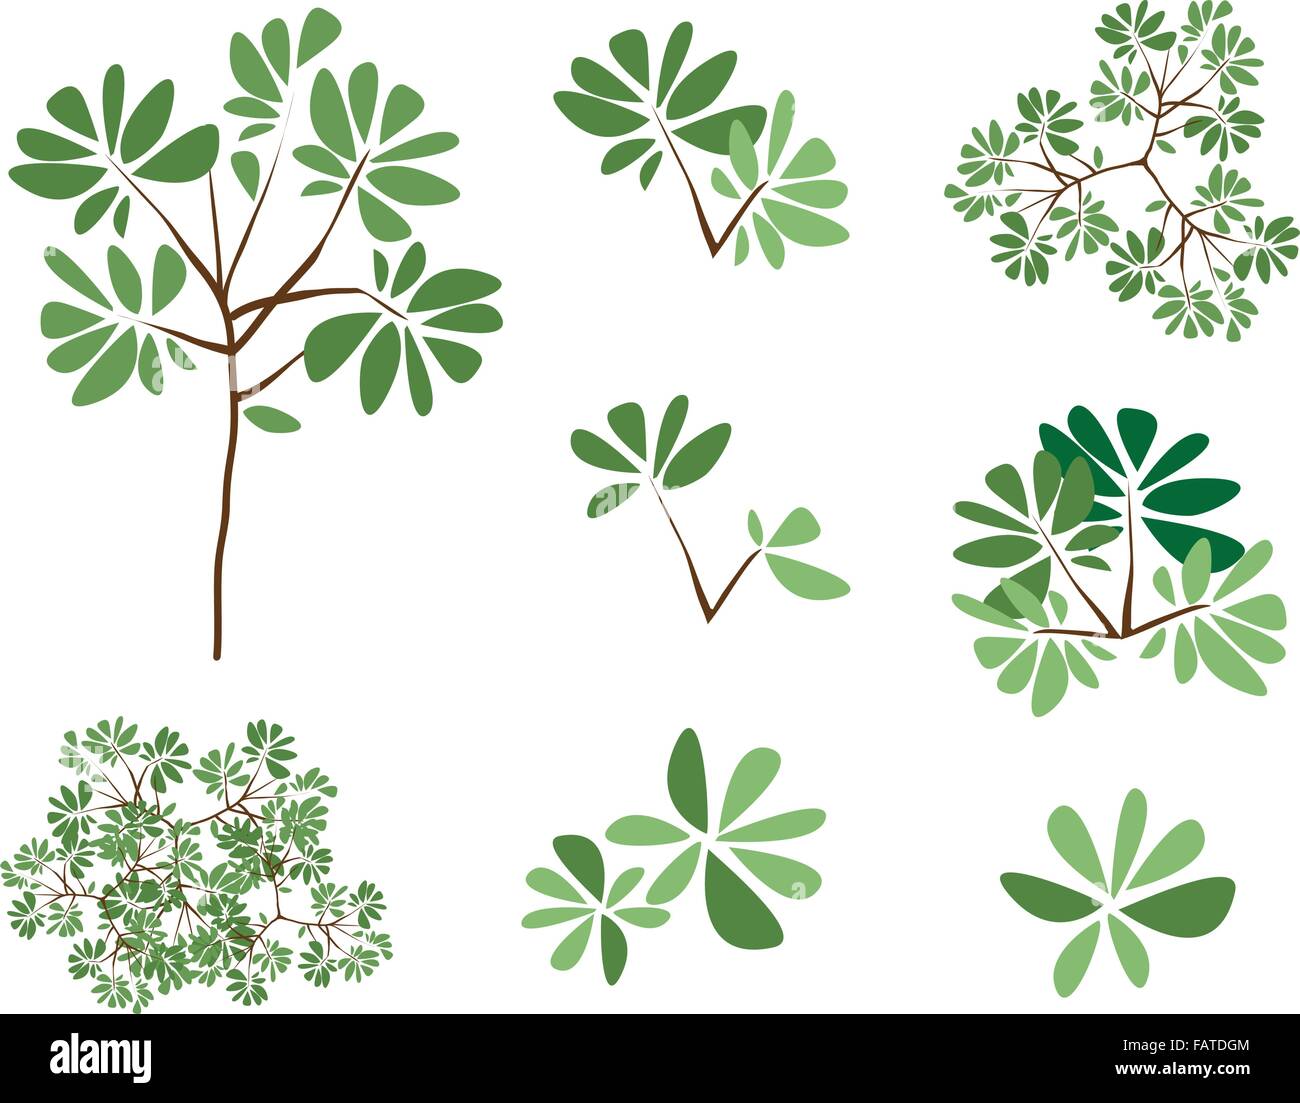 Terminalia ivorensis, An Illustration Collection of Landscaping Treetop Symbols or Isometric Trees and Plants for Garden Decorat Stock Vector